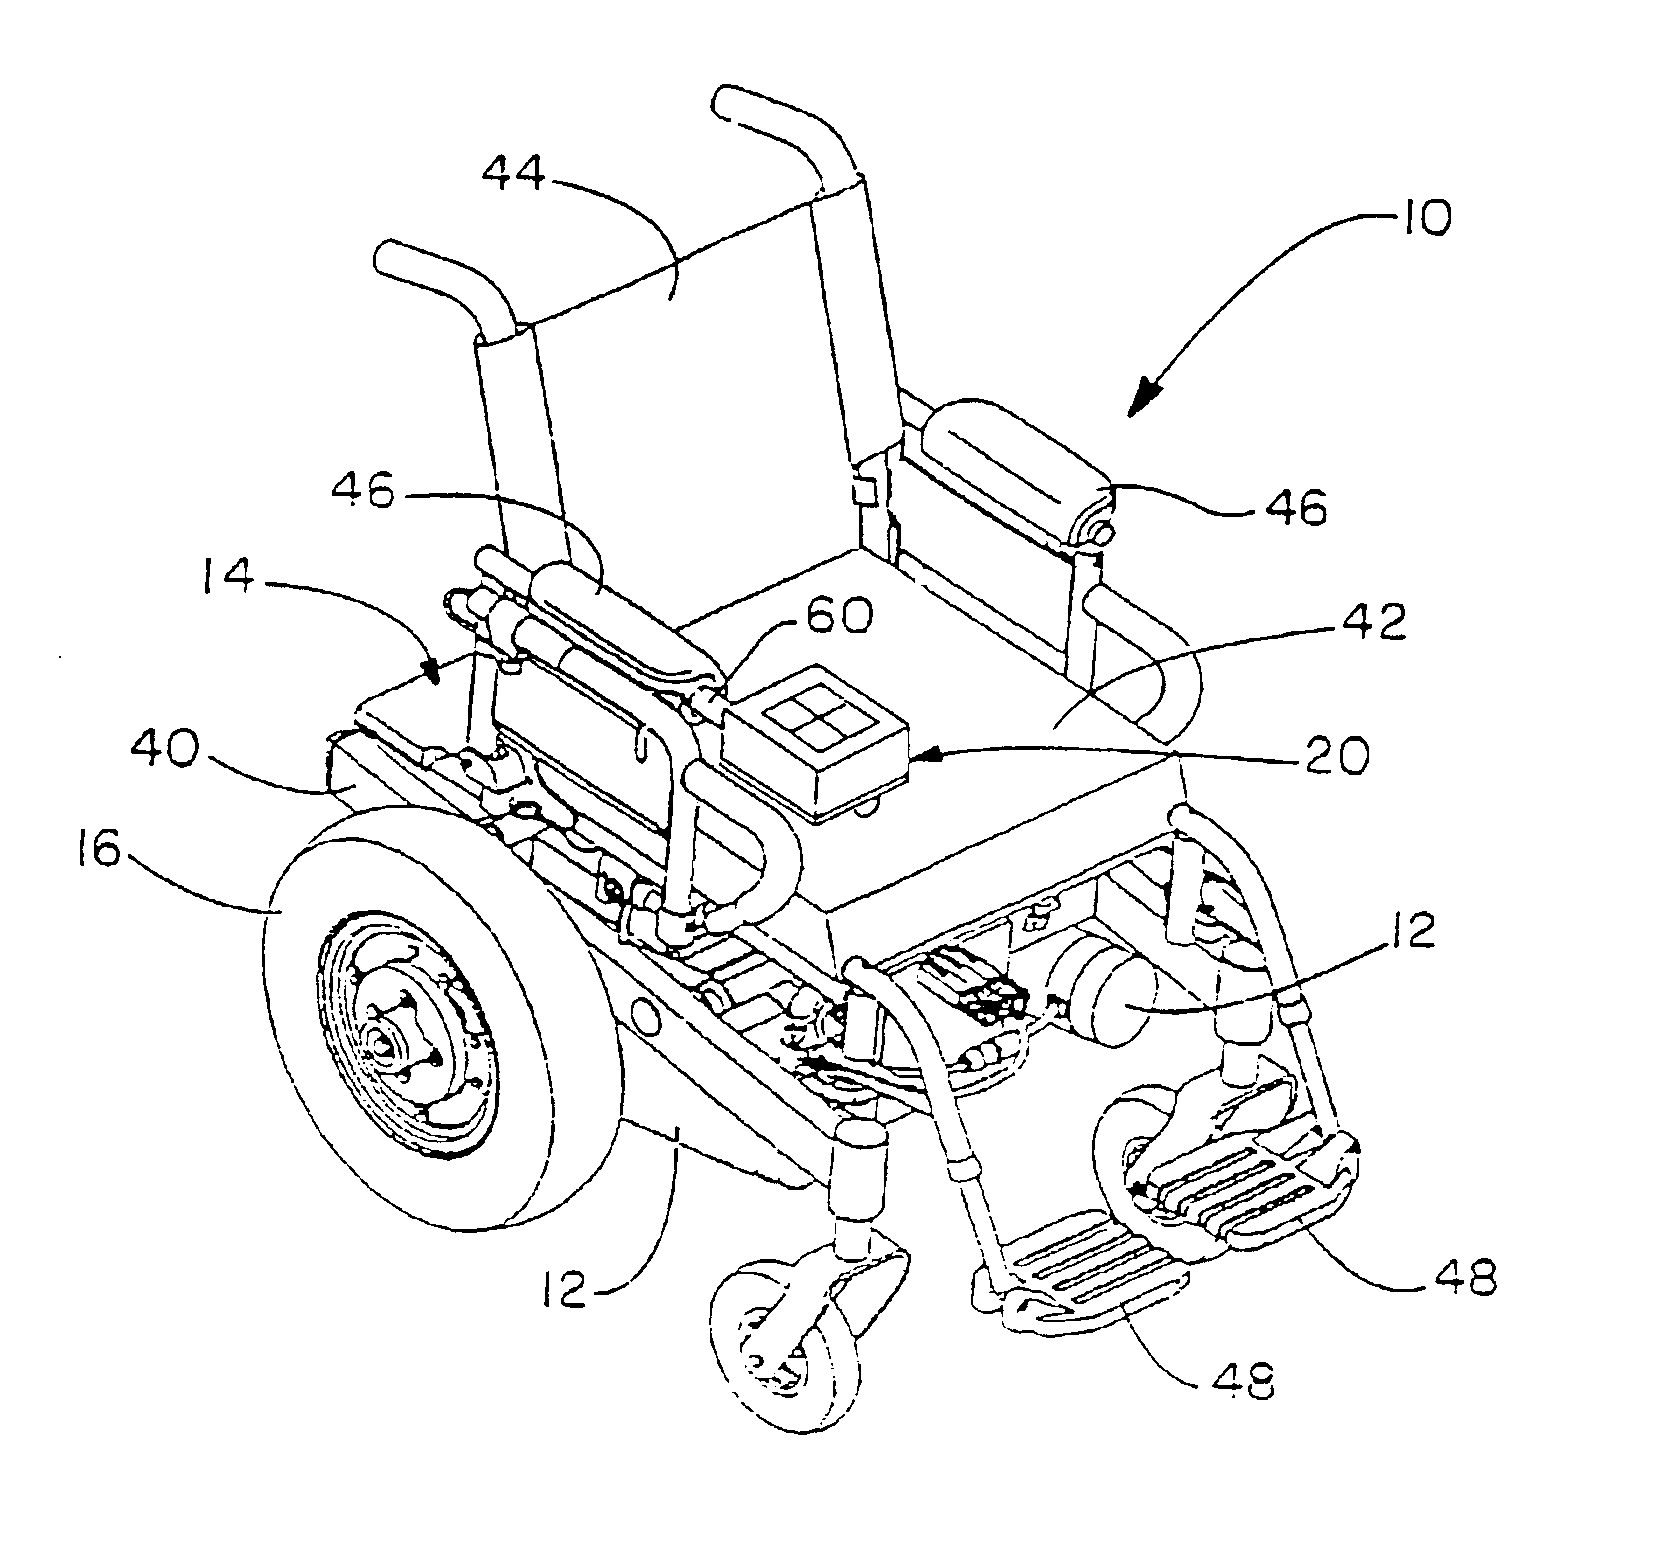 Wheelchair having speed and direction control touchpad